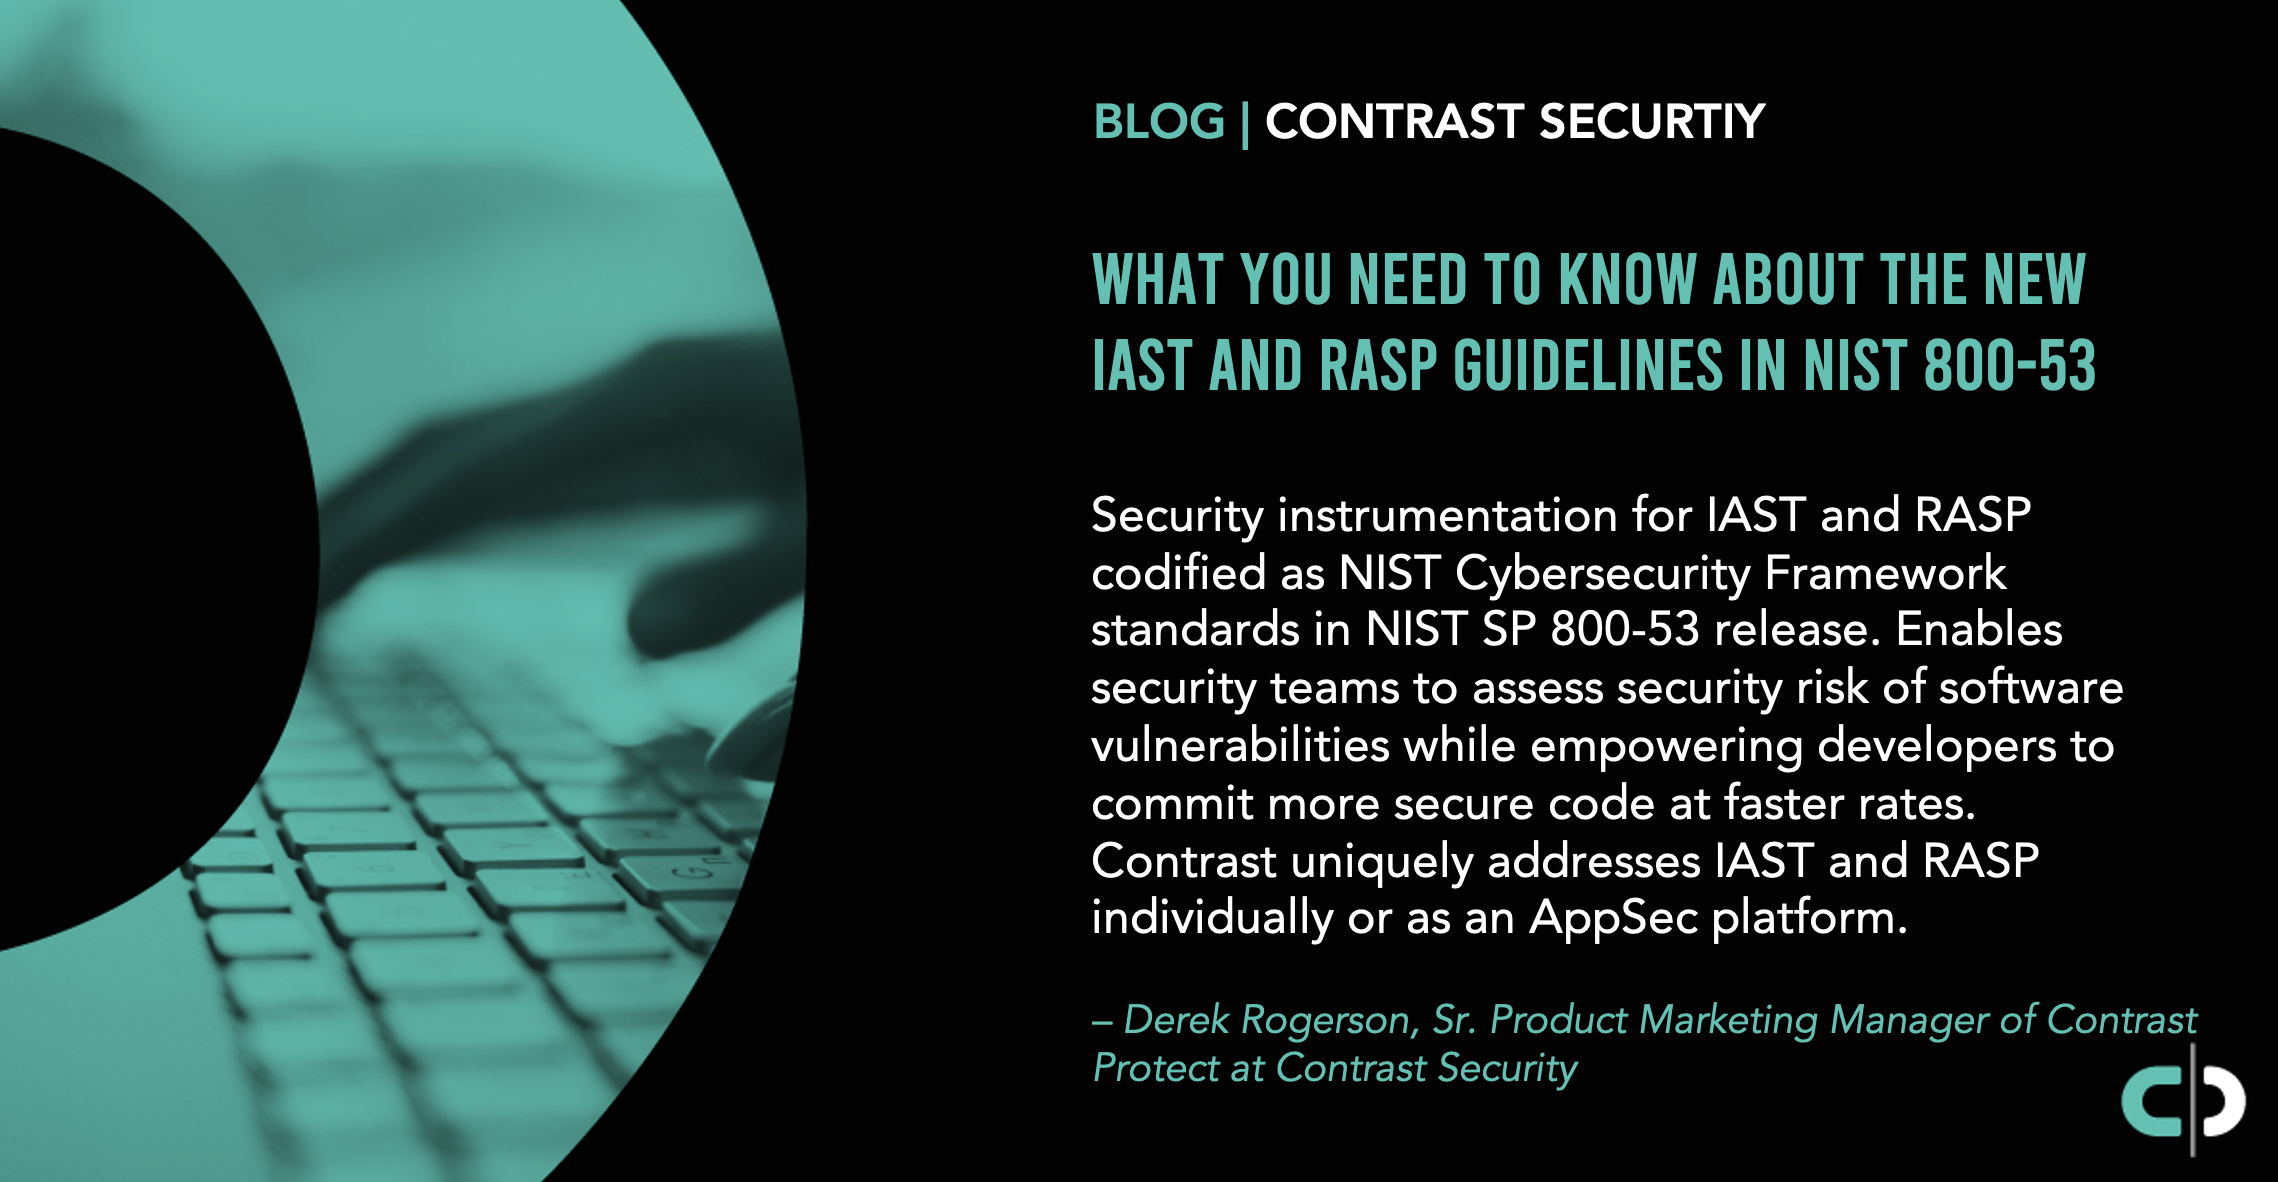 What You Need to Know About the New IAST and RASP Guidelines in NIST 800-53